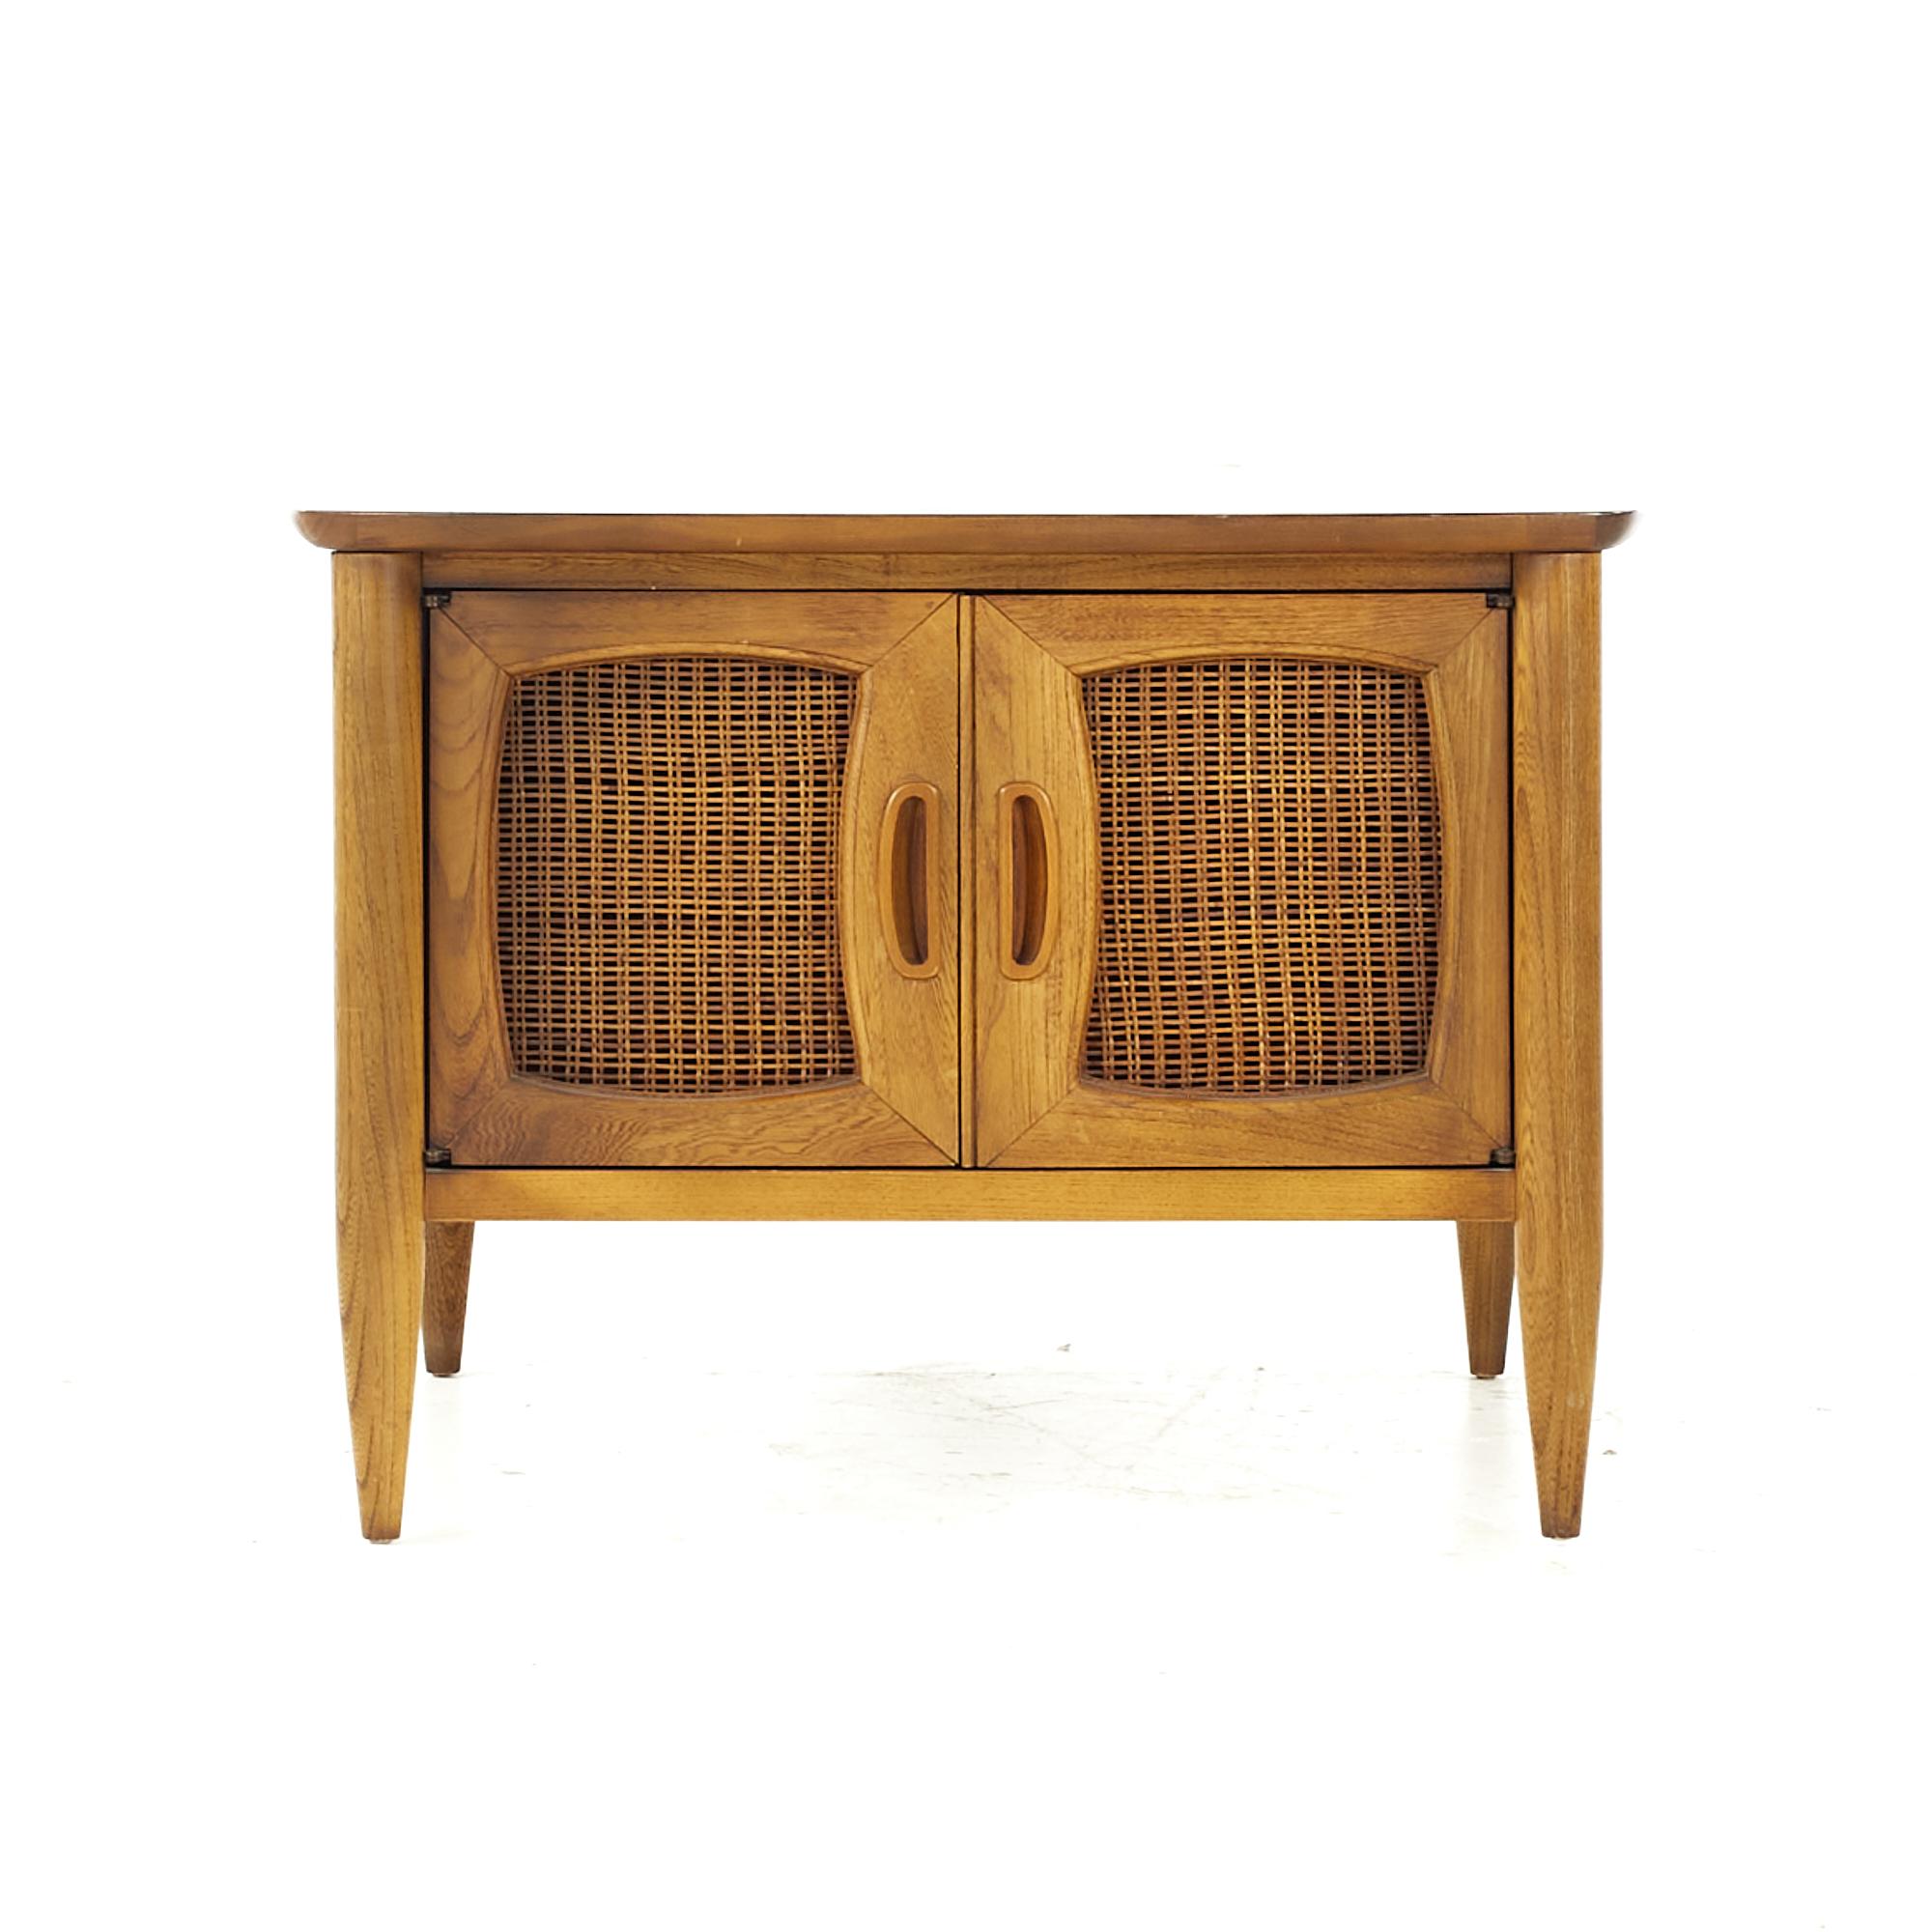 Lane midcentury Walnut Side End Table

This side table measures: 28 wide x 27.75 deep x 20.25 inches high

All pieces of furniture can be had in what we call restored vintage condition. That means the piece is restored upon purchase so it’s free